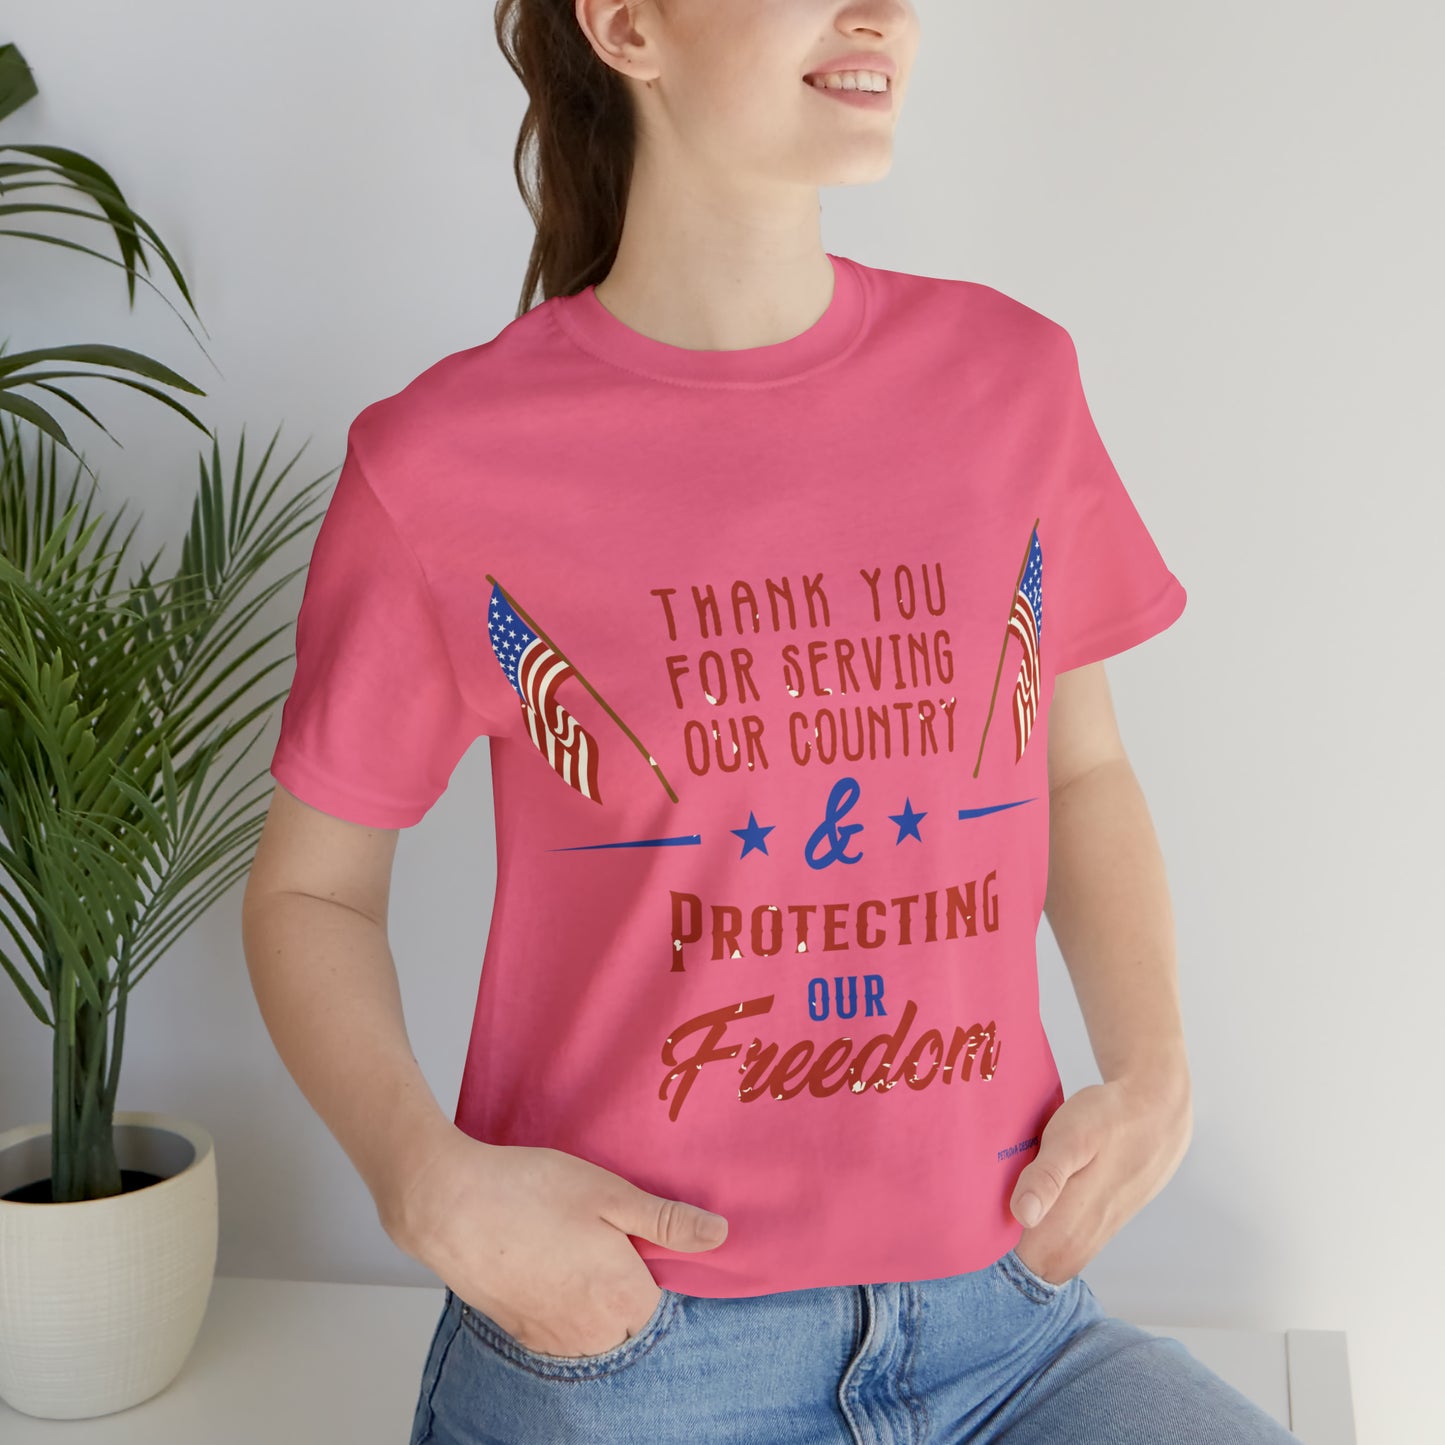 Charity Pink T-Shirt Tshirt Design Gift for Friend and Family Short Sleeved Shirt Veterans Day Petrova Designs